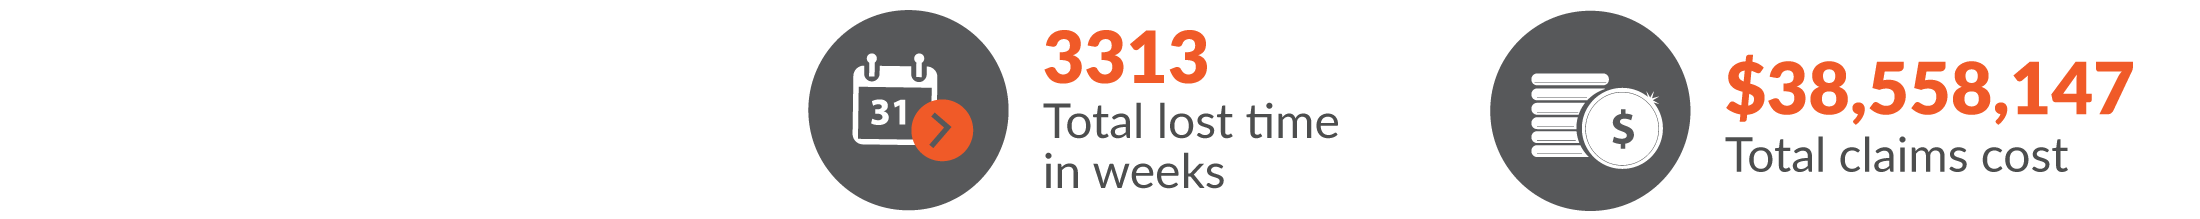 This infographic shows the total workers compensation claims resulted in 3313 total lost time in weeks and $38,558,147 was paid in benefits.